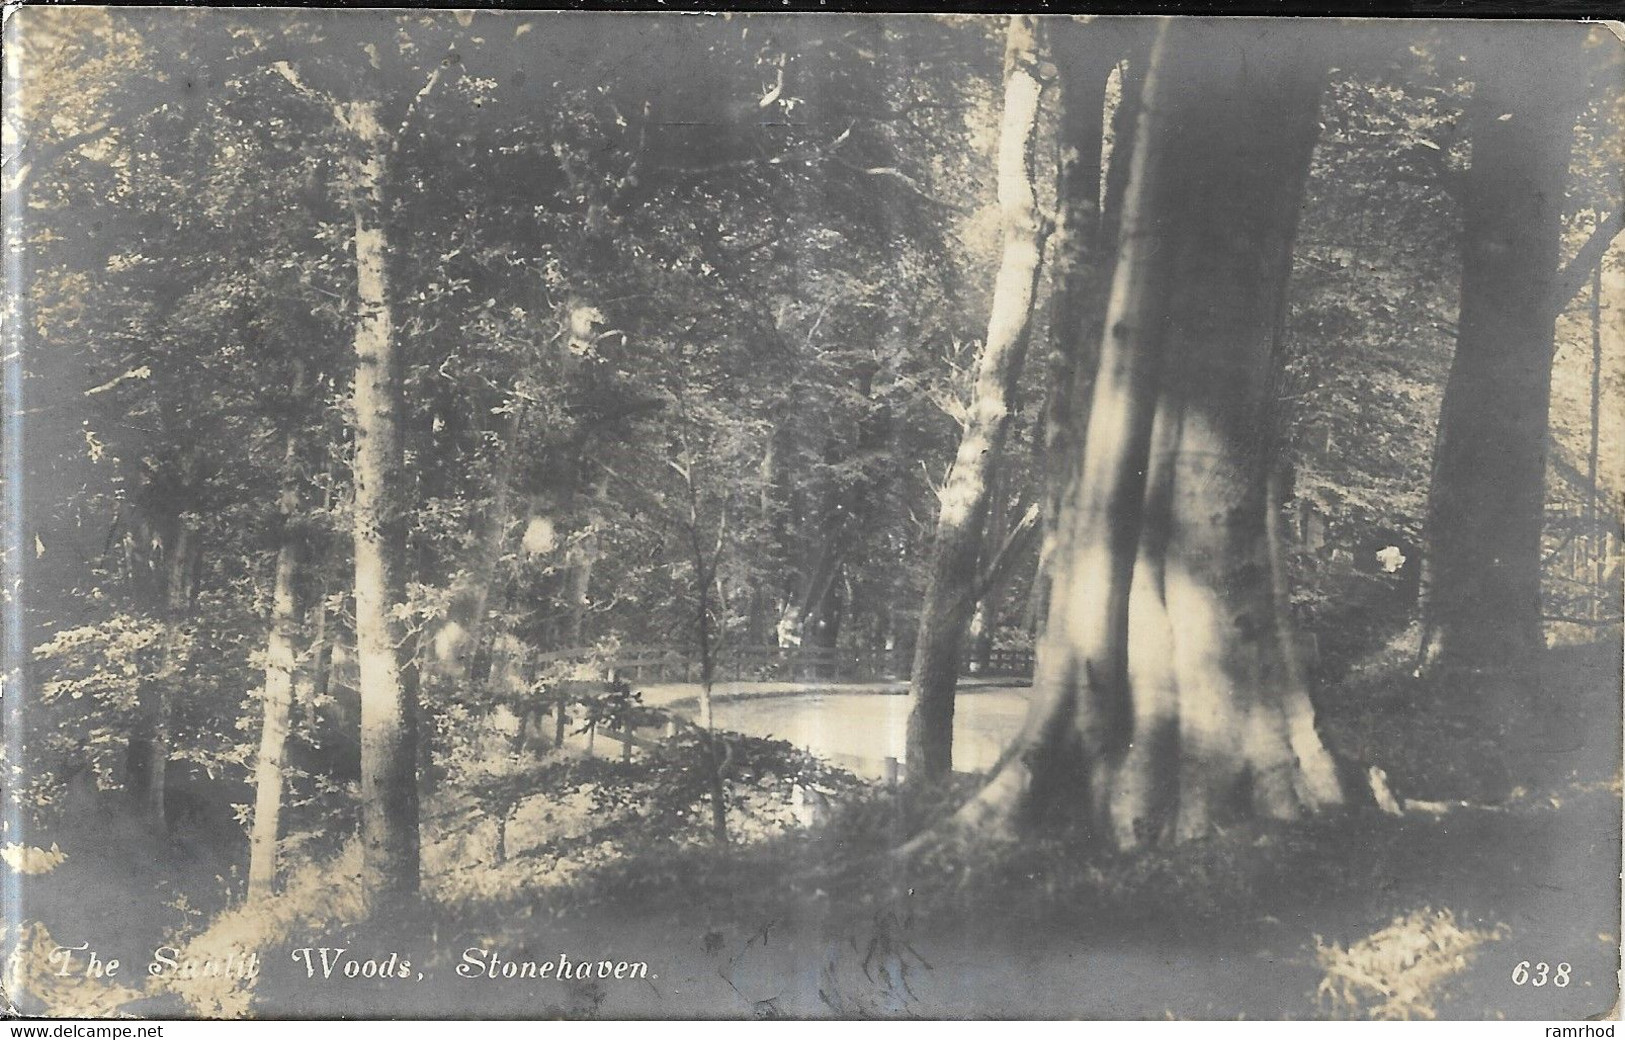 STONEHAVEN, Woods (Publisher - Davidsons Real Photographic Series) Date - Sep 1926, Used - Kincardineshire